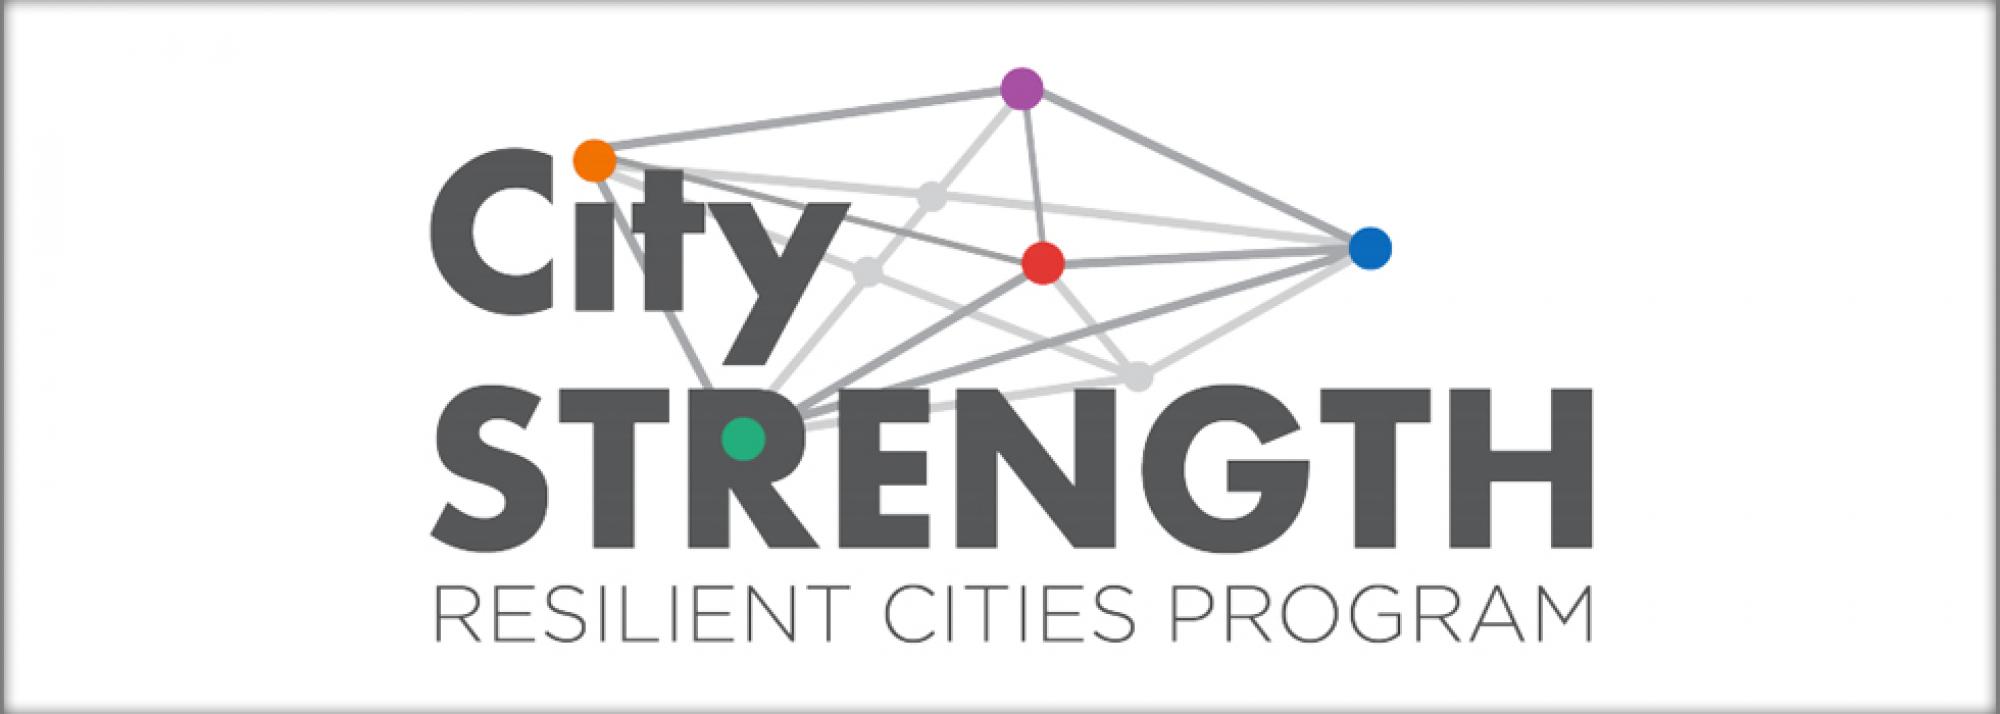 global resilient cities network (grcn)